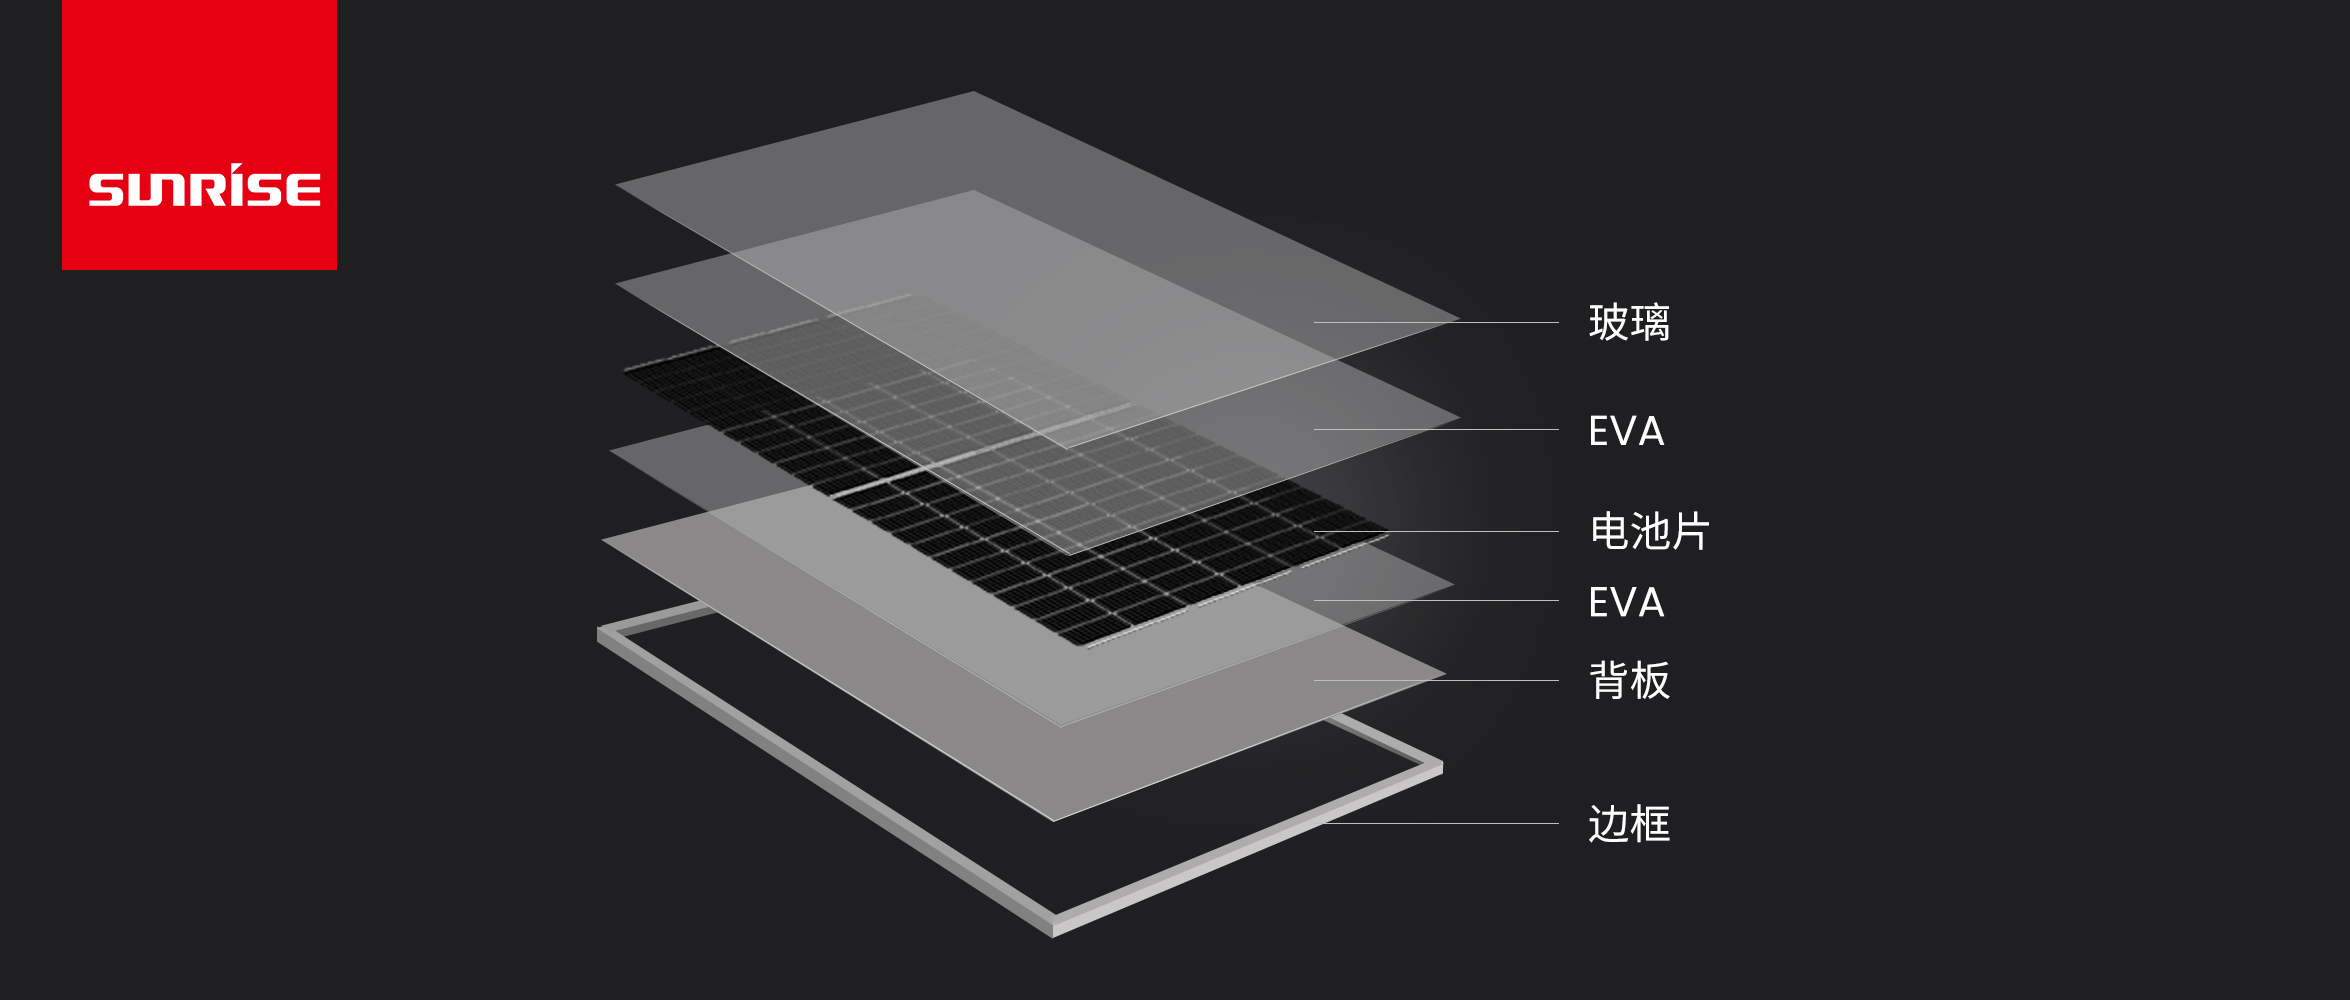 Main Raw Materials and Components of Solar Cell Modules